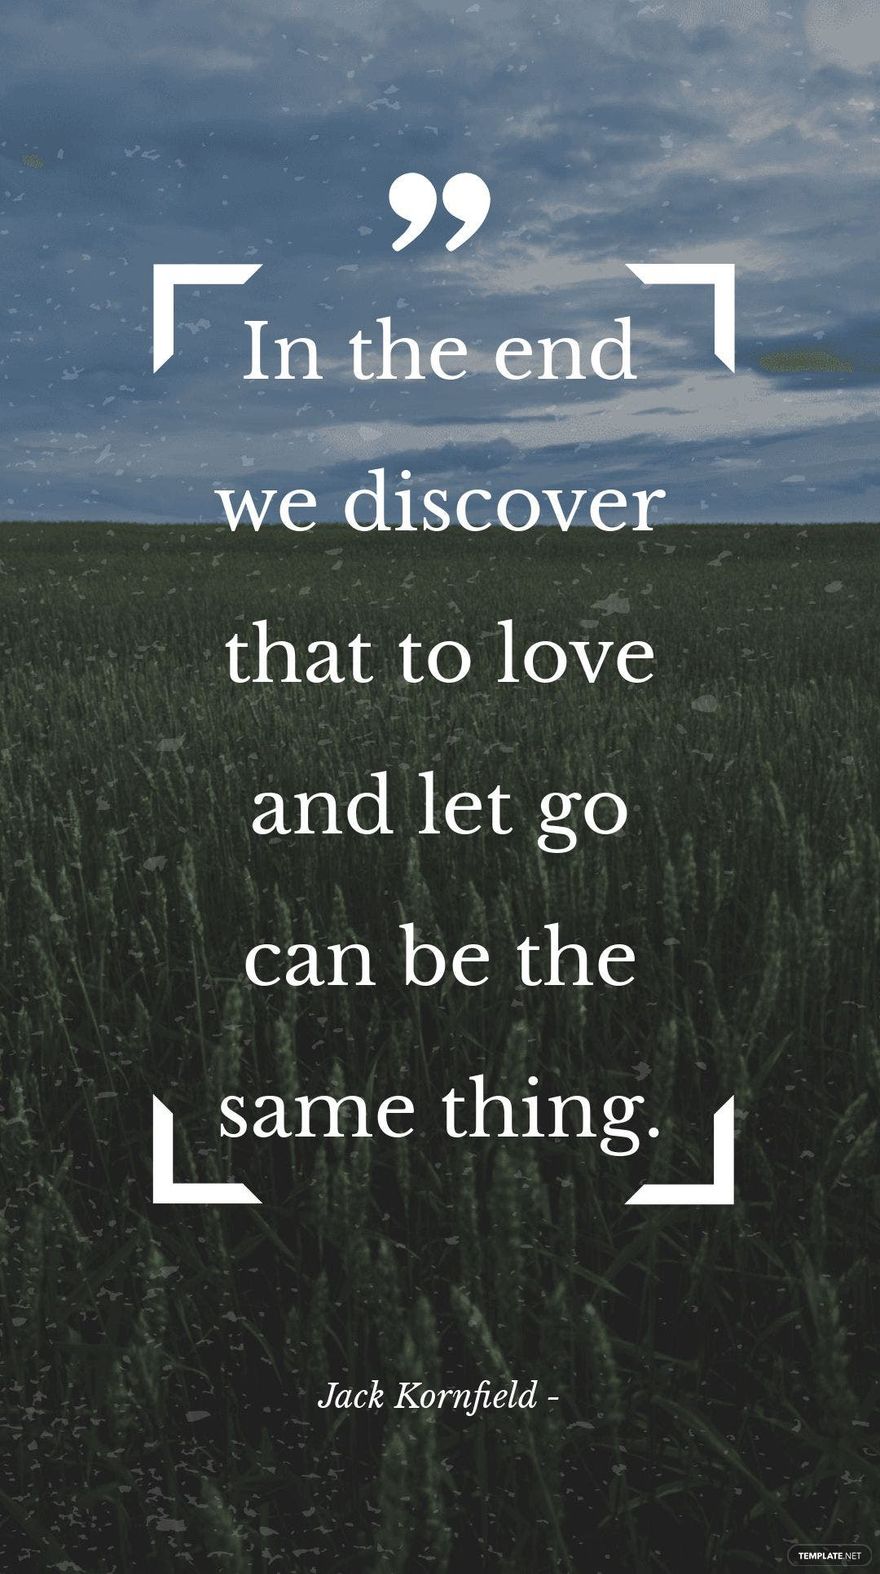 Jack Kornfield - "In the end we discover that to love and let go can be the same thing.”